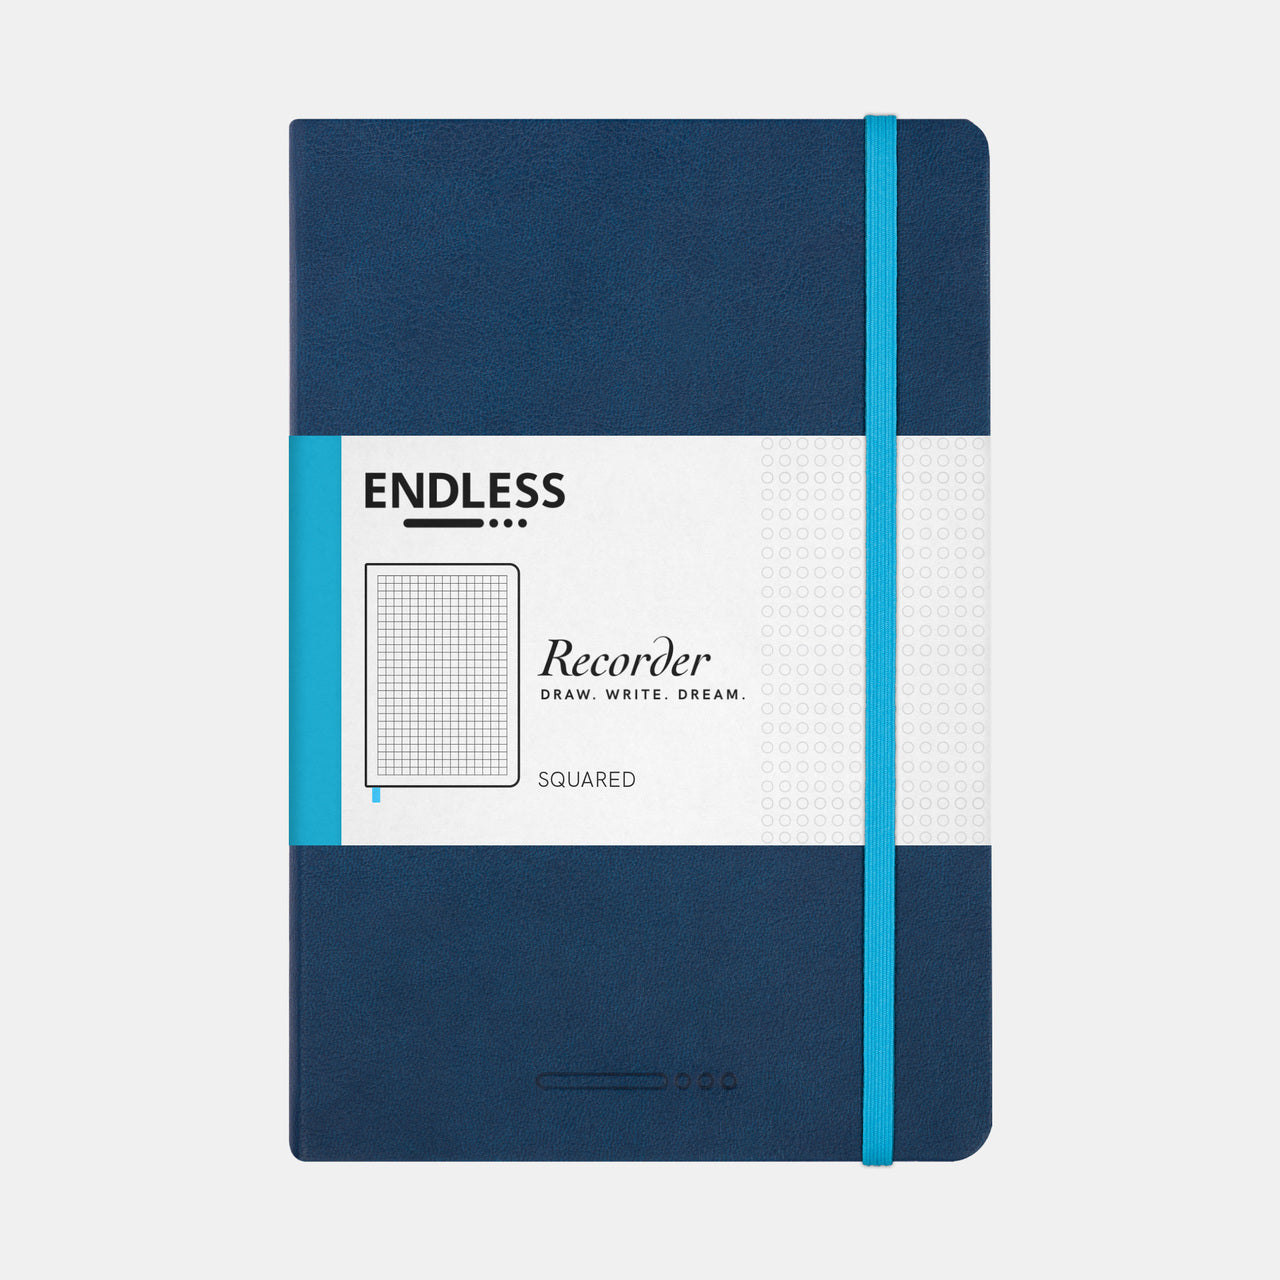 The Endless Recorder is available in four colors, and 4 paper styles.